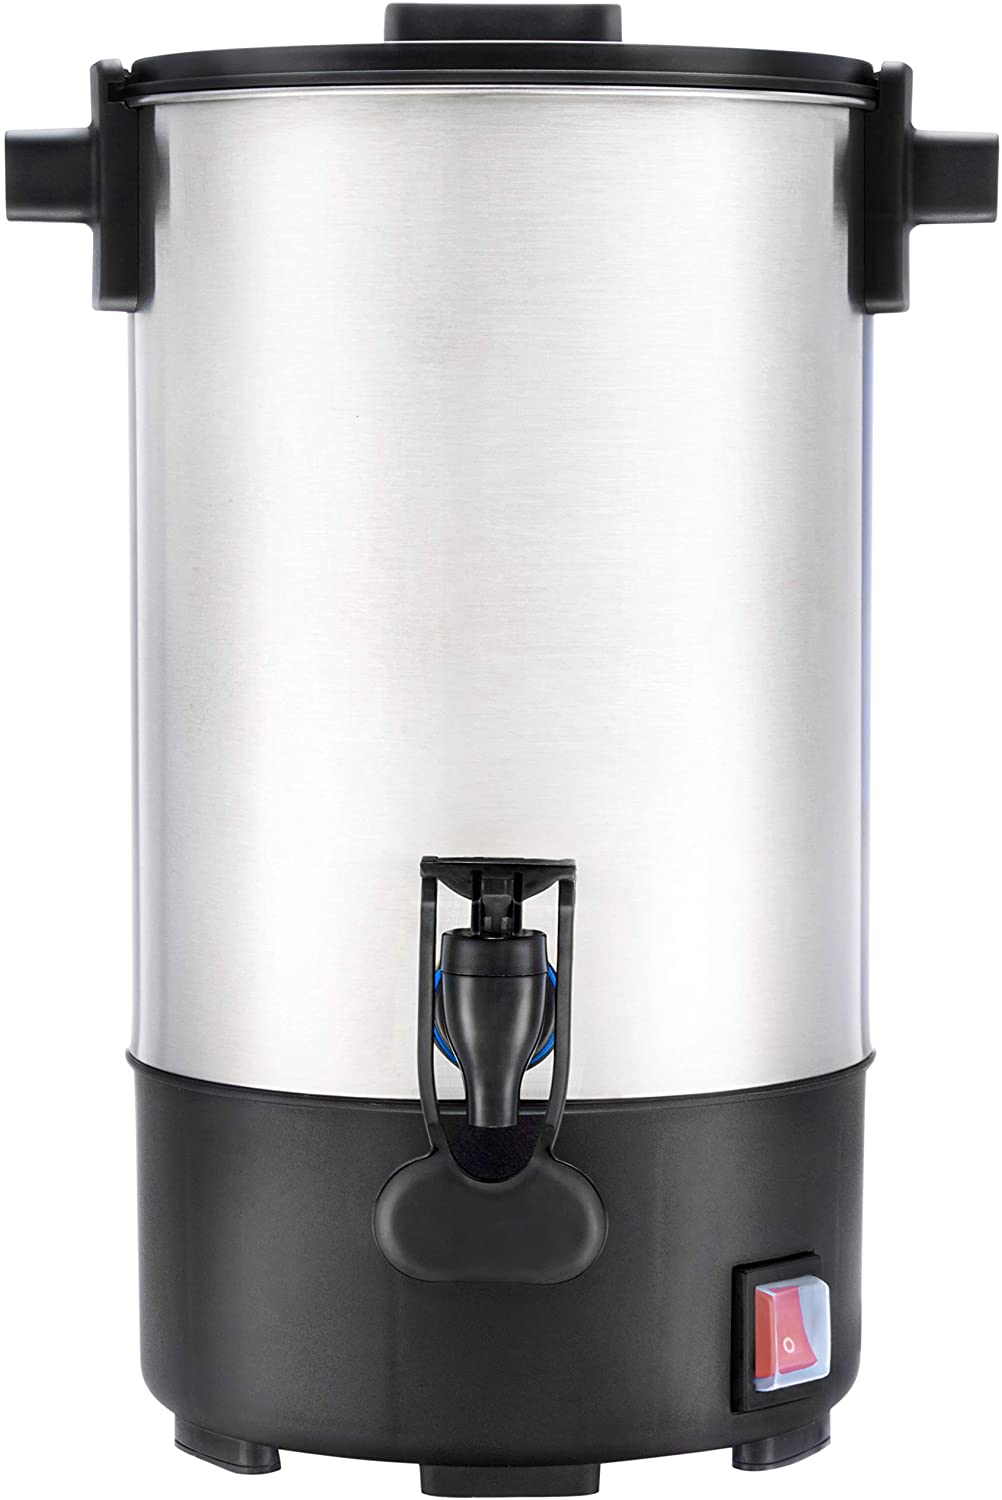 Sybil Coffee Percolator Is Your Best Business Meeting Solution